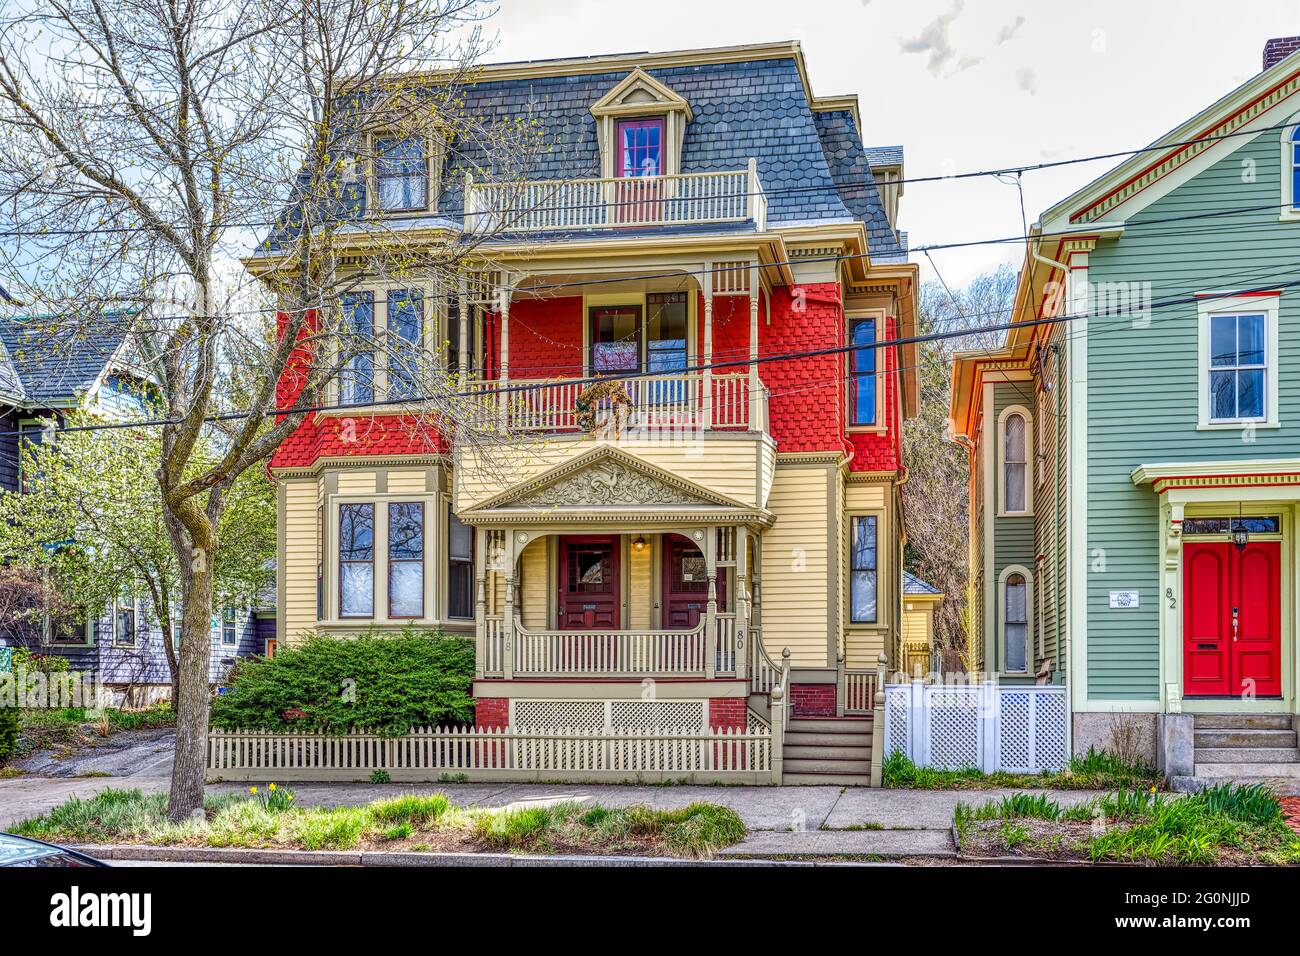 80 Dexter Street, Queen Anne style house listed in the Broadway-Armory Historic District, National Register of Historic Places. Stock Photo